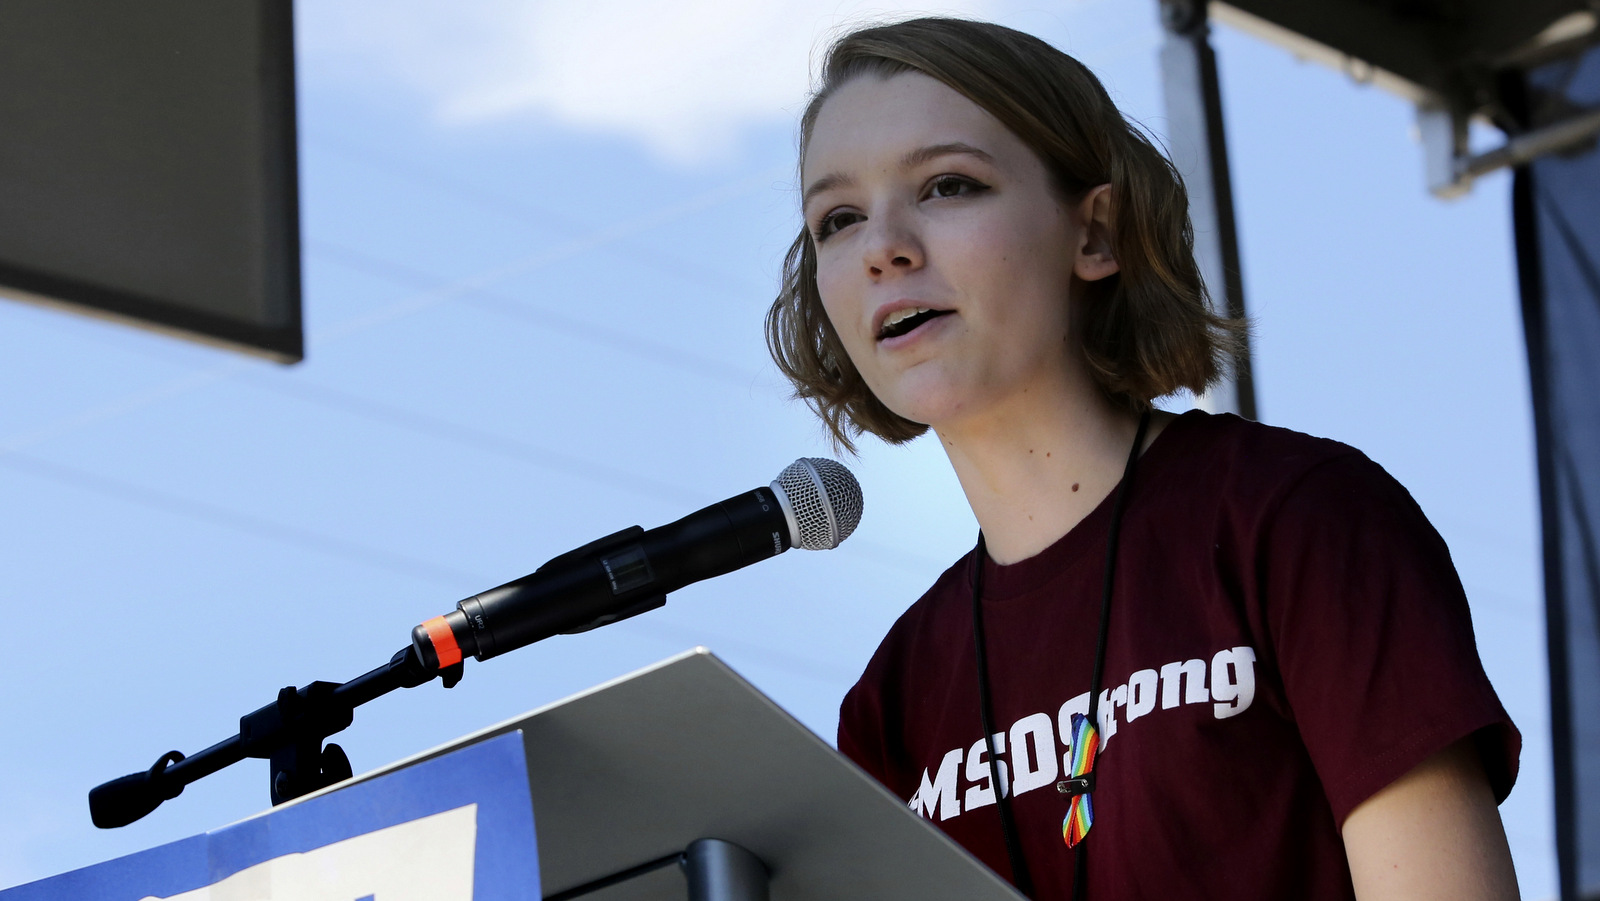 Marjory Stoneman Douglas High School student Amanda Marty delivers remarks during a rally at Lake Eola Park in downtown Orlando, as a part of the nationwide protest against gun violence across the U.S., March 24, 2018. More than 20,000 rallied in Orlando, according to crowd estimates. (Joe Burbank /Orlando Sentinel via AP)